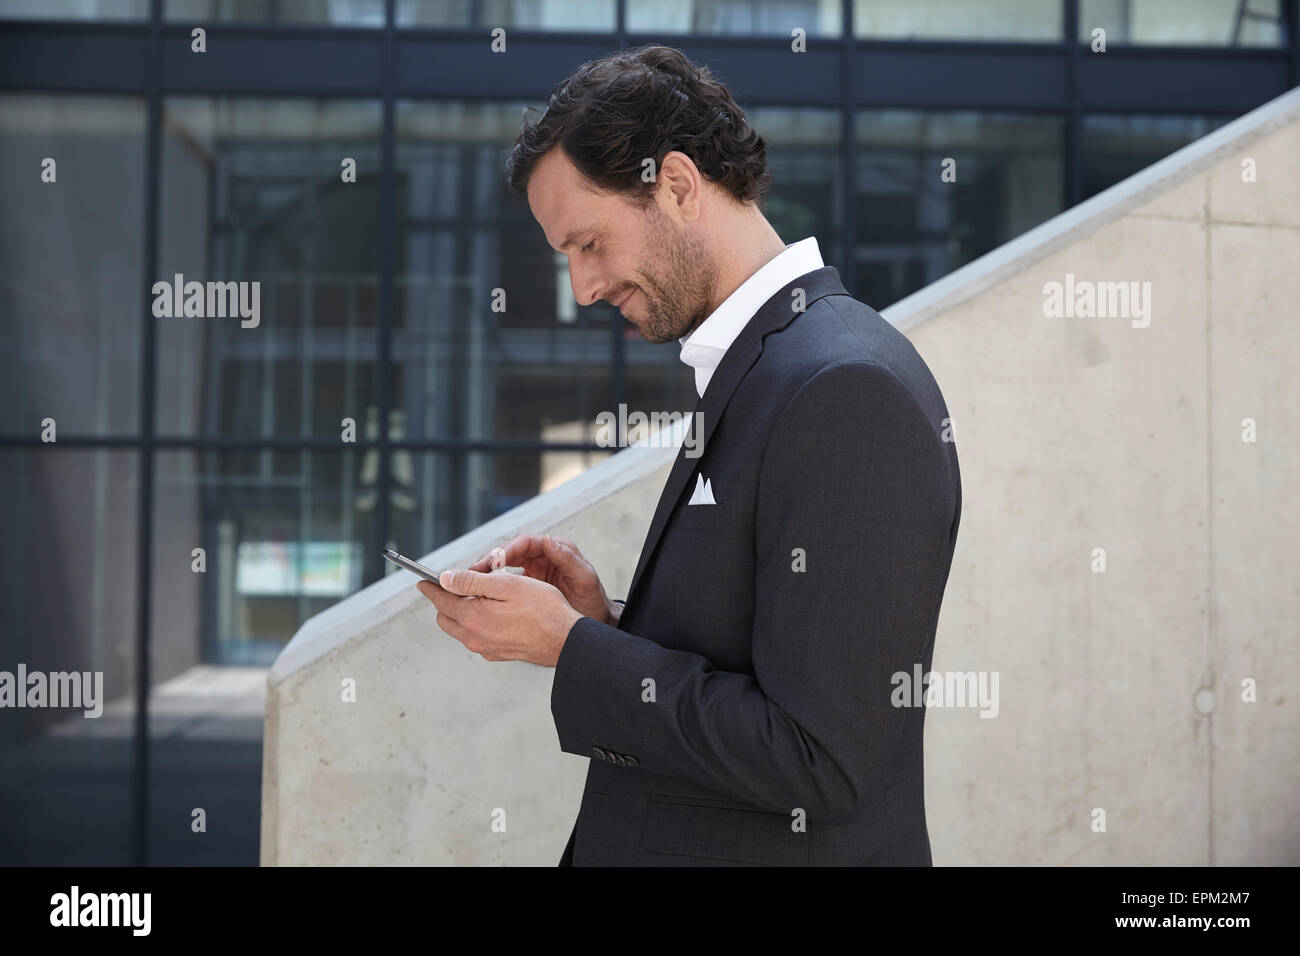 Businessman using smartphone in a modern building Stock Photo